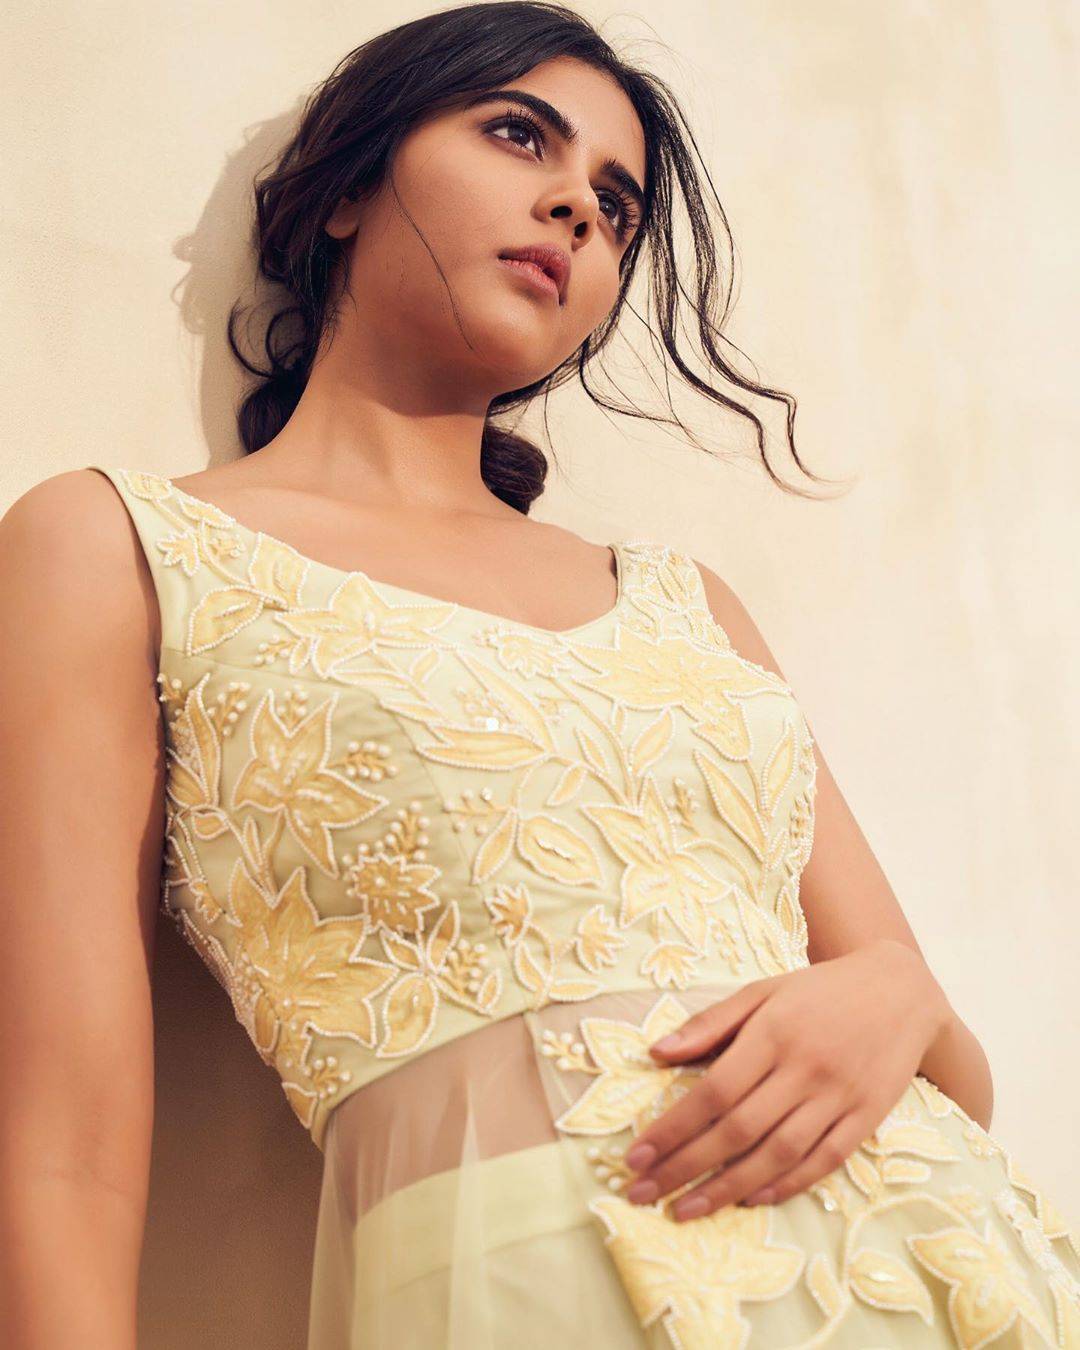 Kalyani Priyadarshan was recently seen inn a pale yellow outfit from Mishru that draws out the elegance in her - Fashion Models